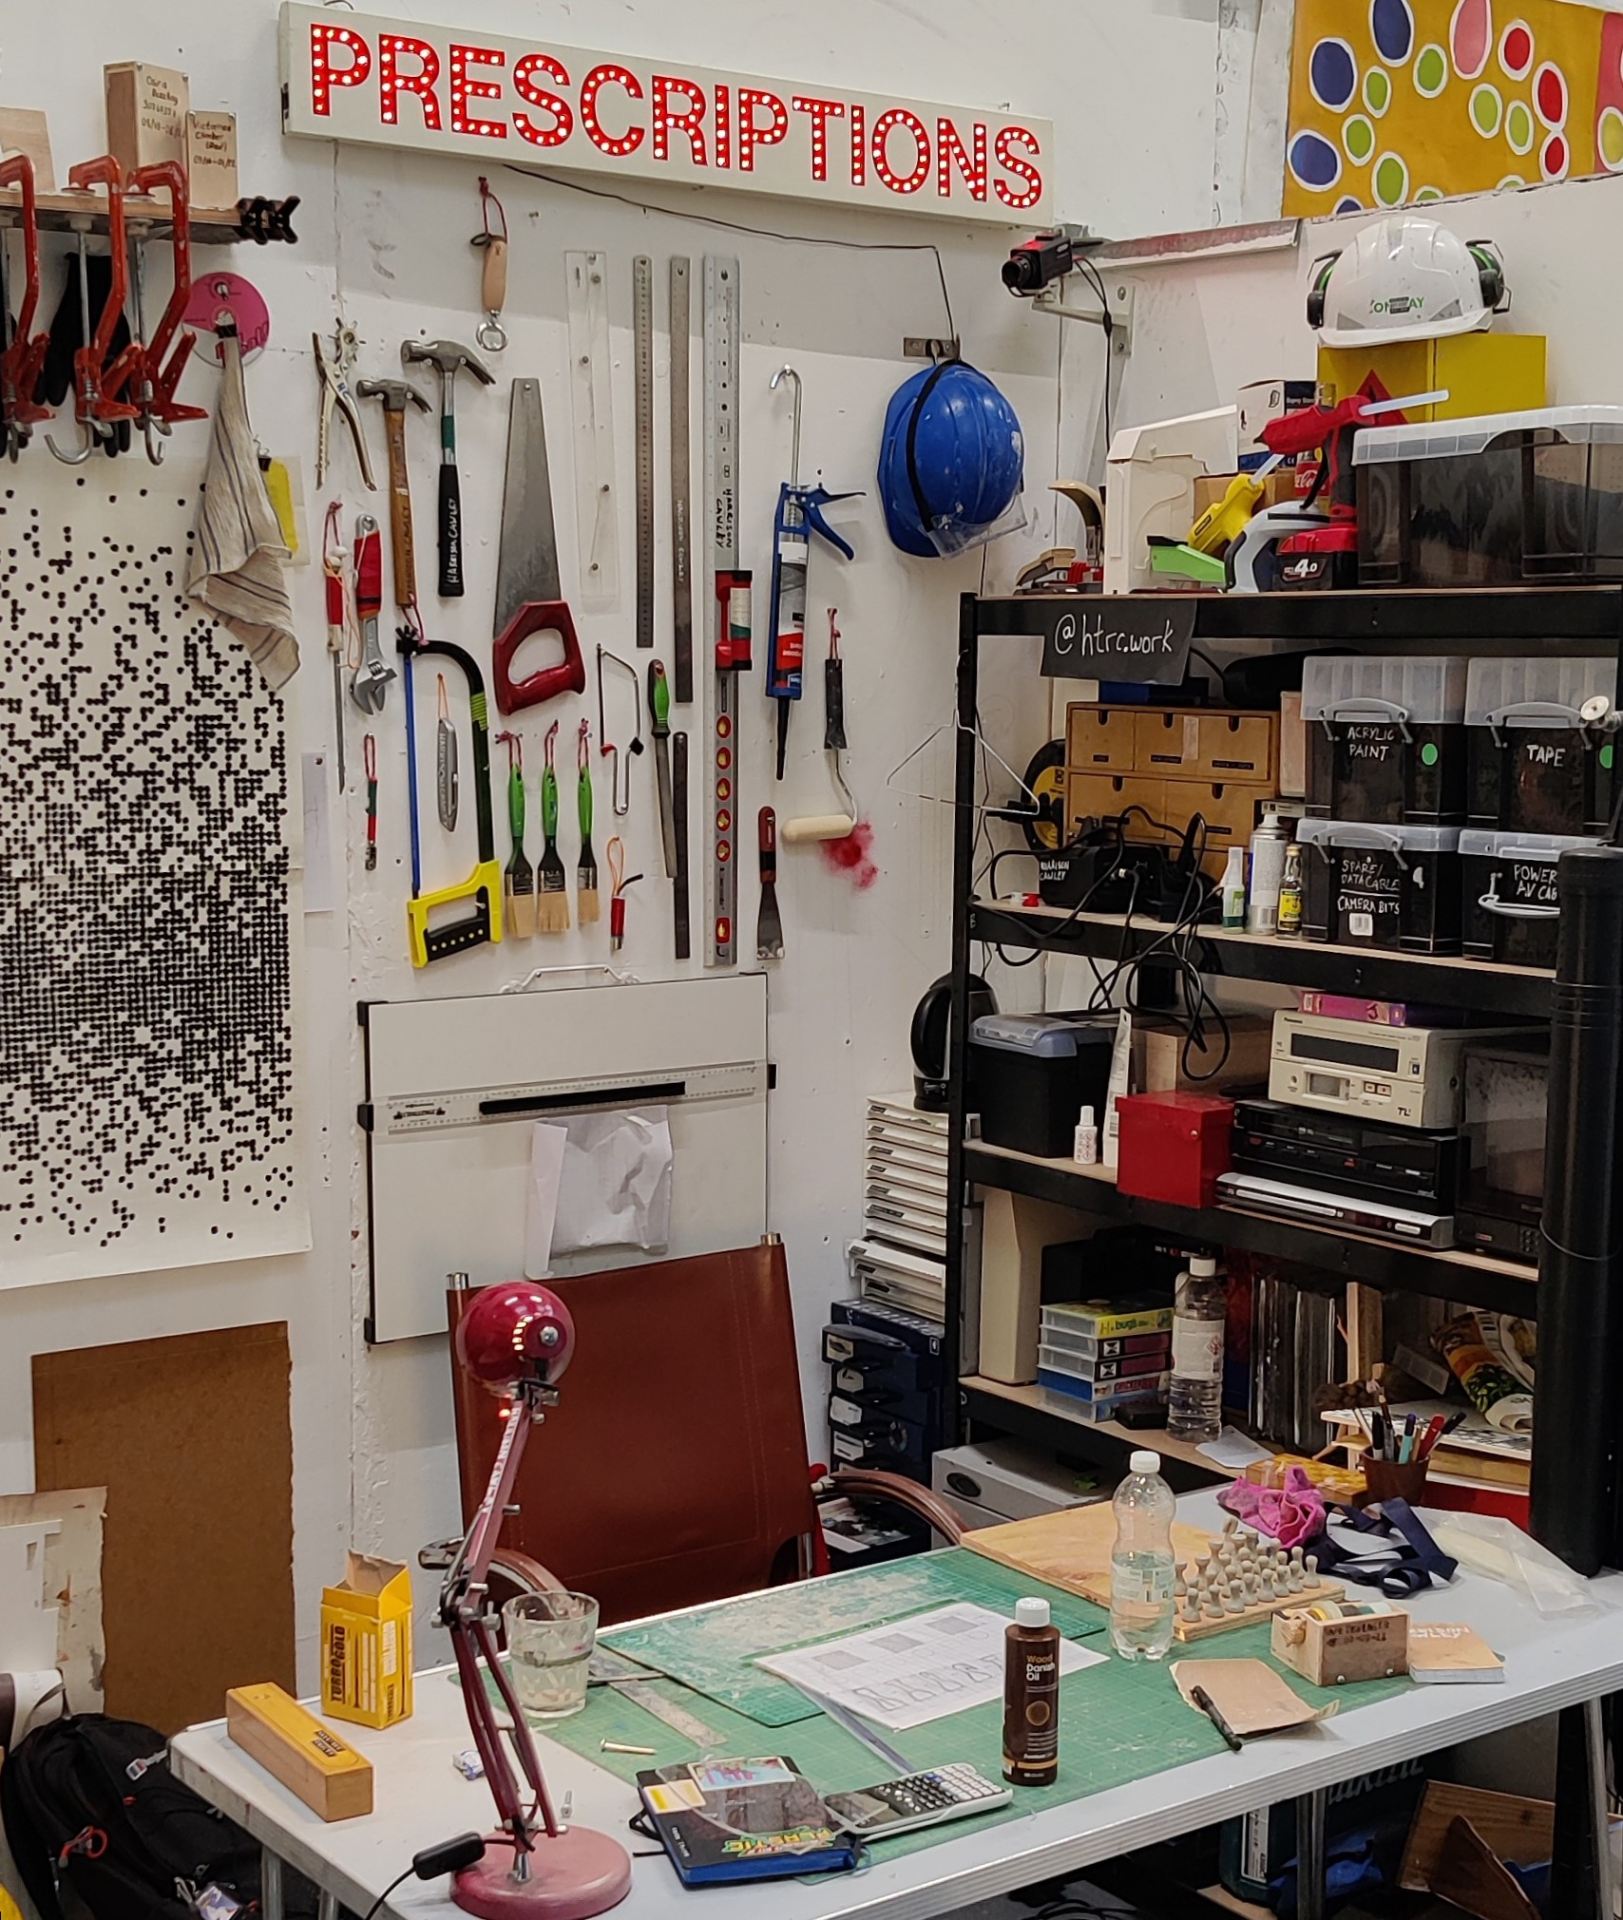 An image of the artist's studio.